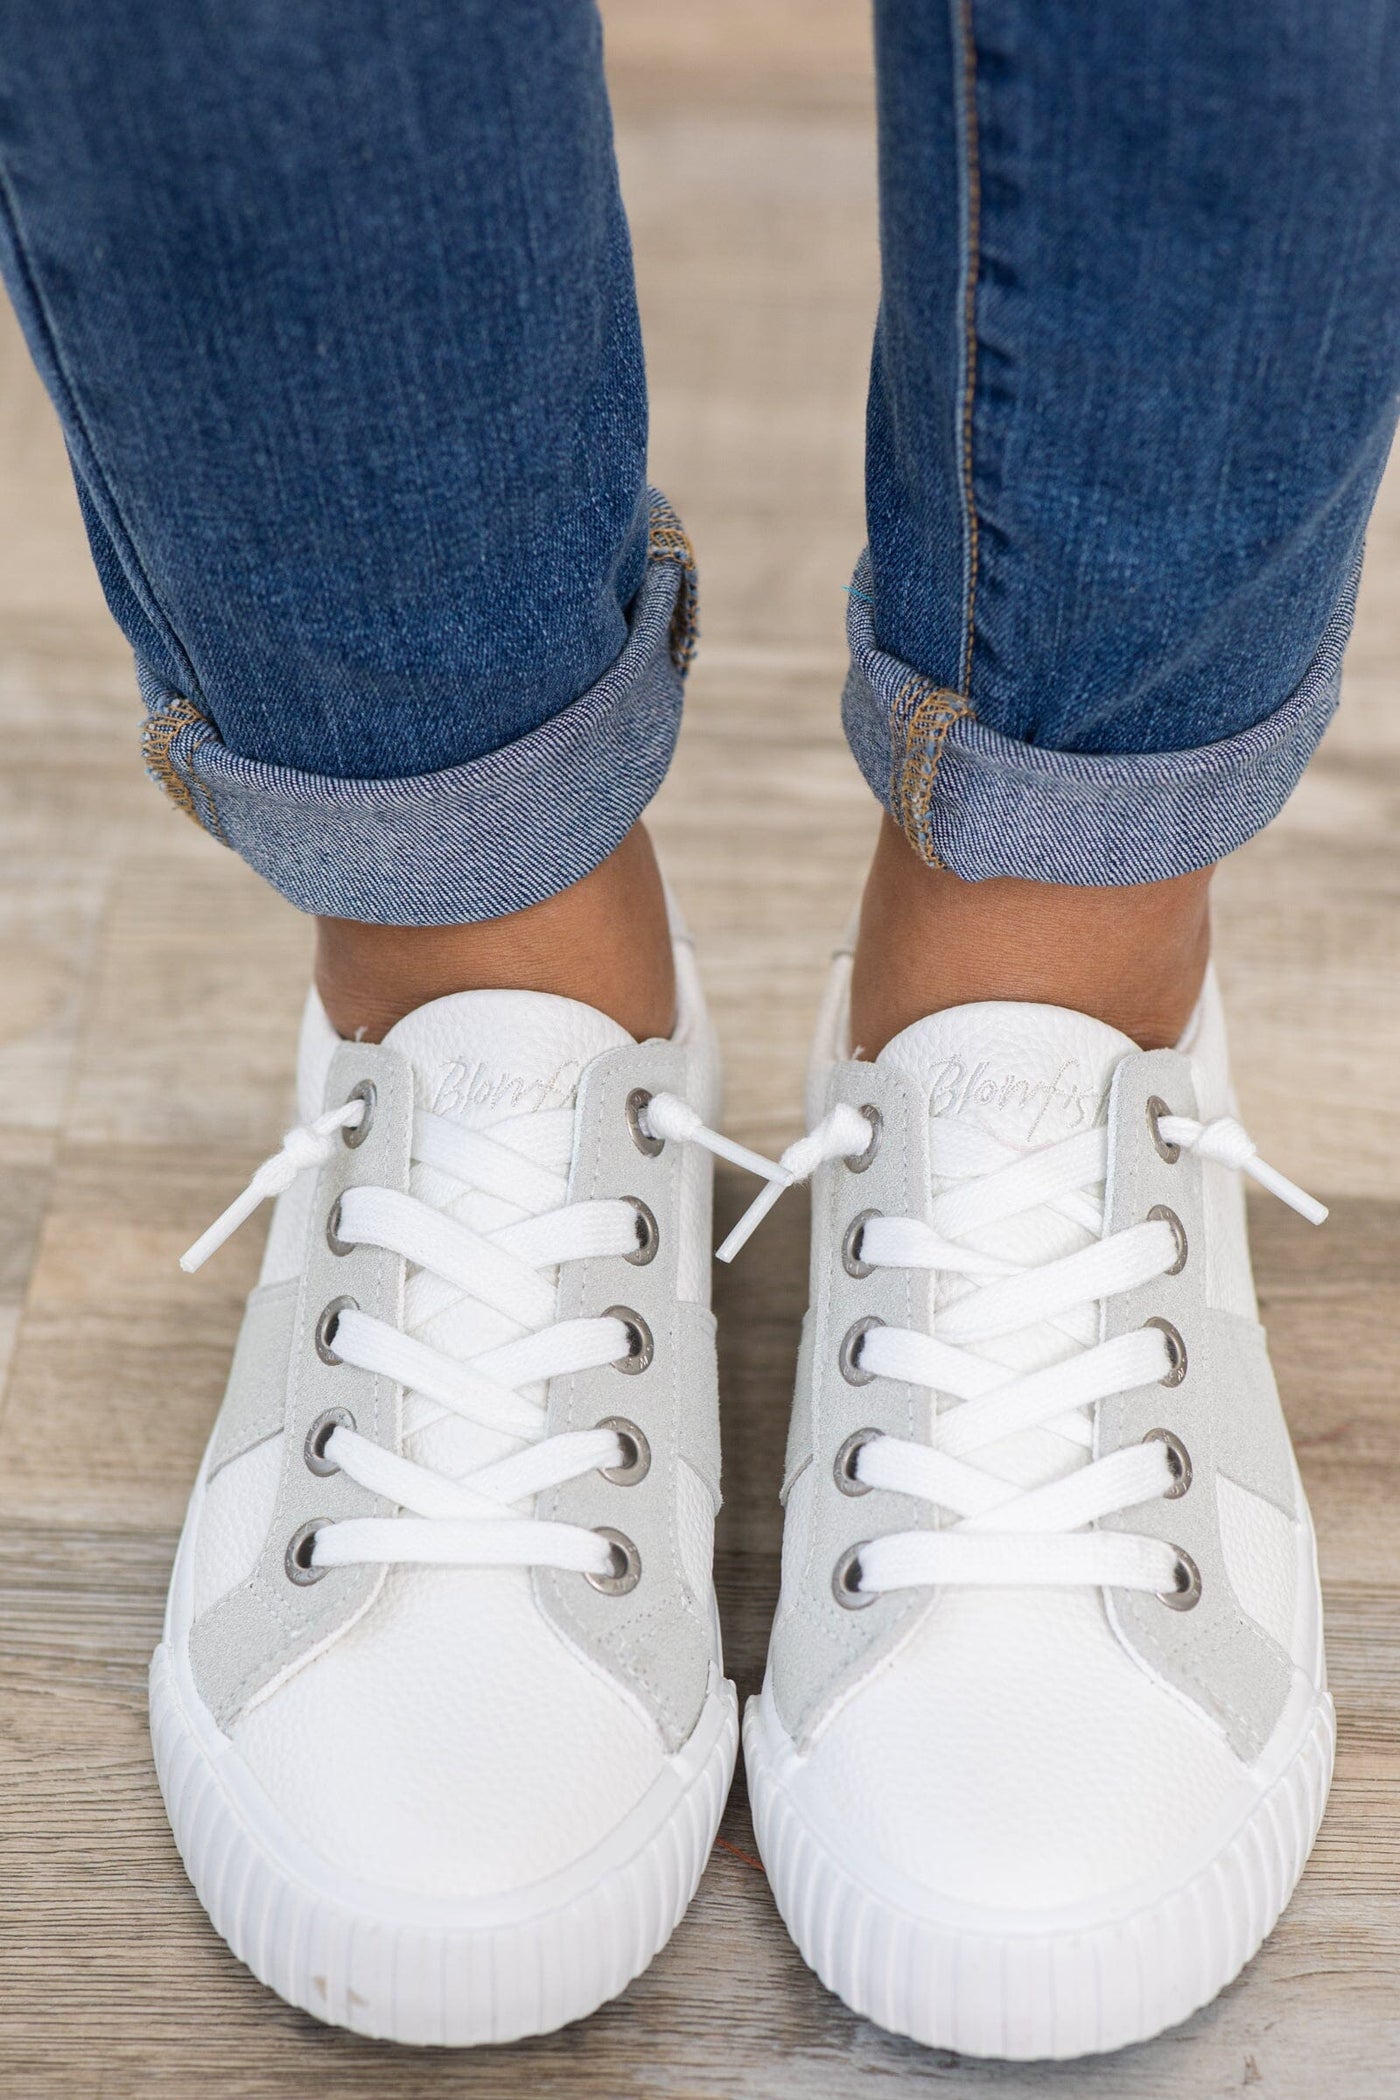 White and Grey Colorblock Sneakers - Filly Flair